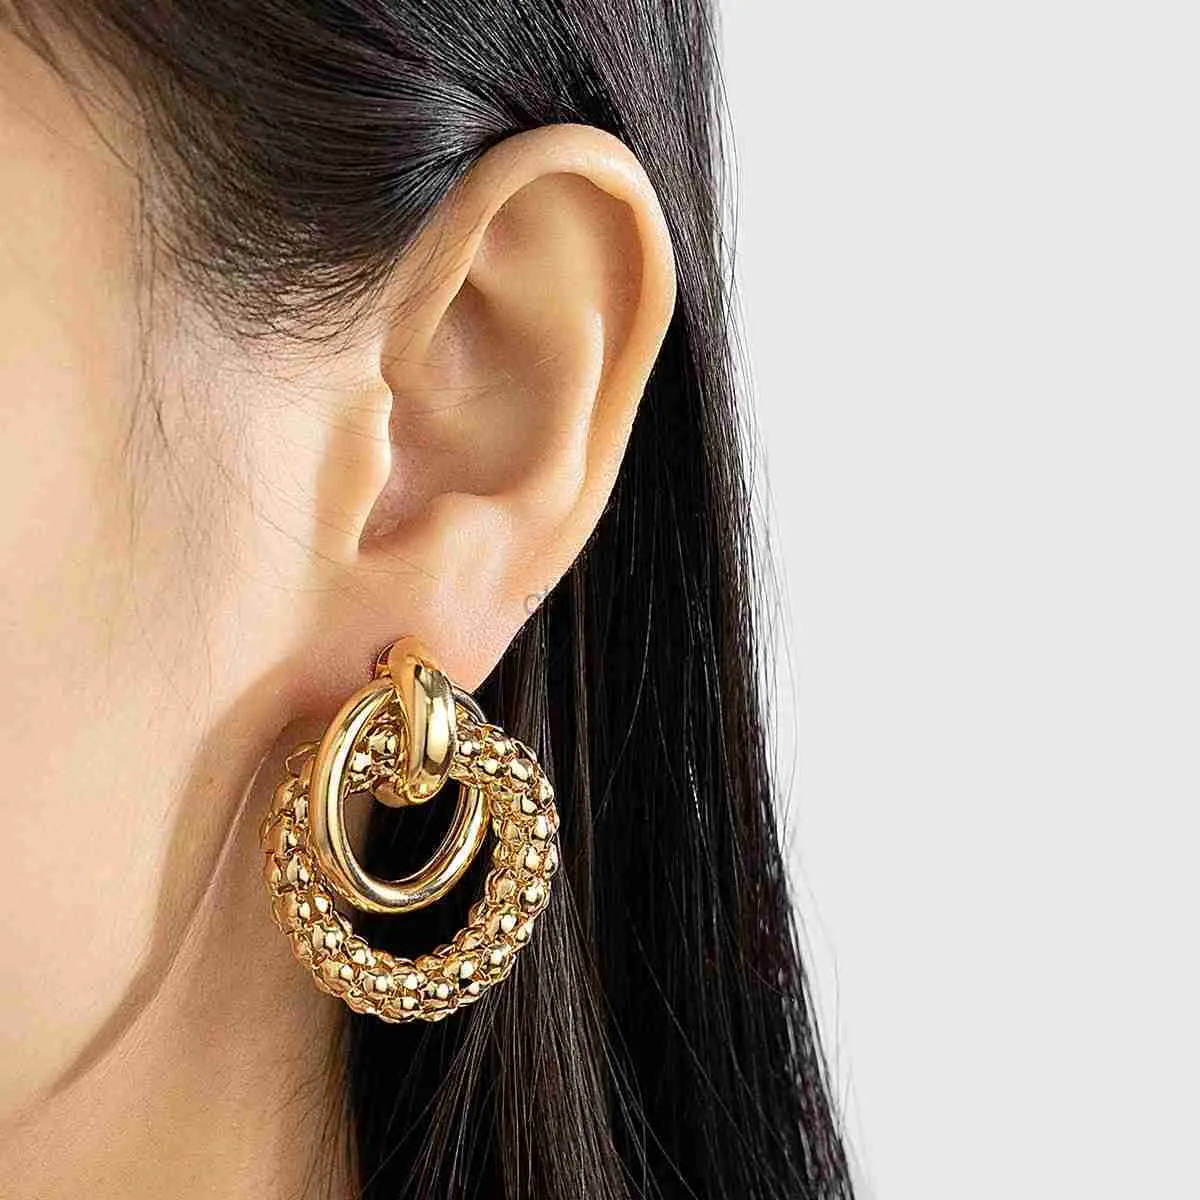 Other New Punk Vintage Clip on Earrings Gold Color Geometric Non Pierced Earrings for Women Fashion Jewelry Gifts 240419